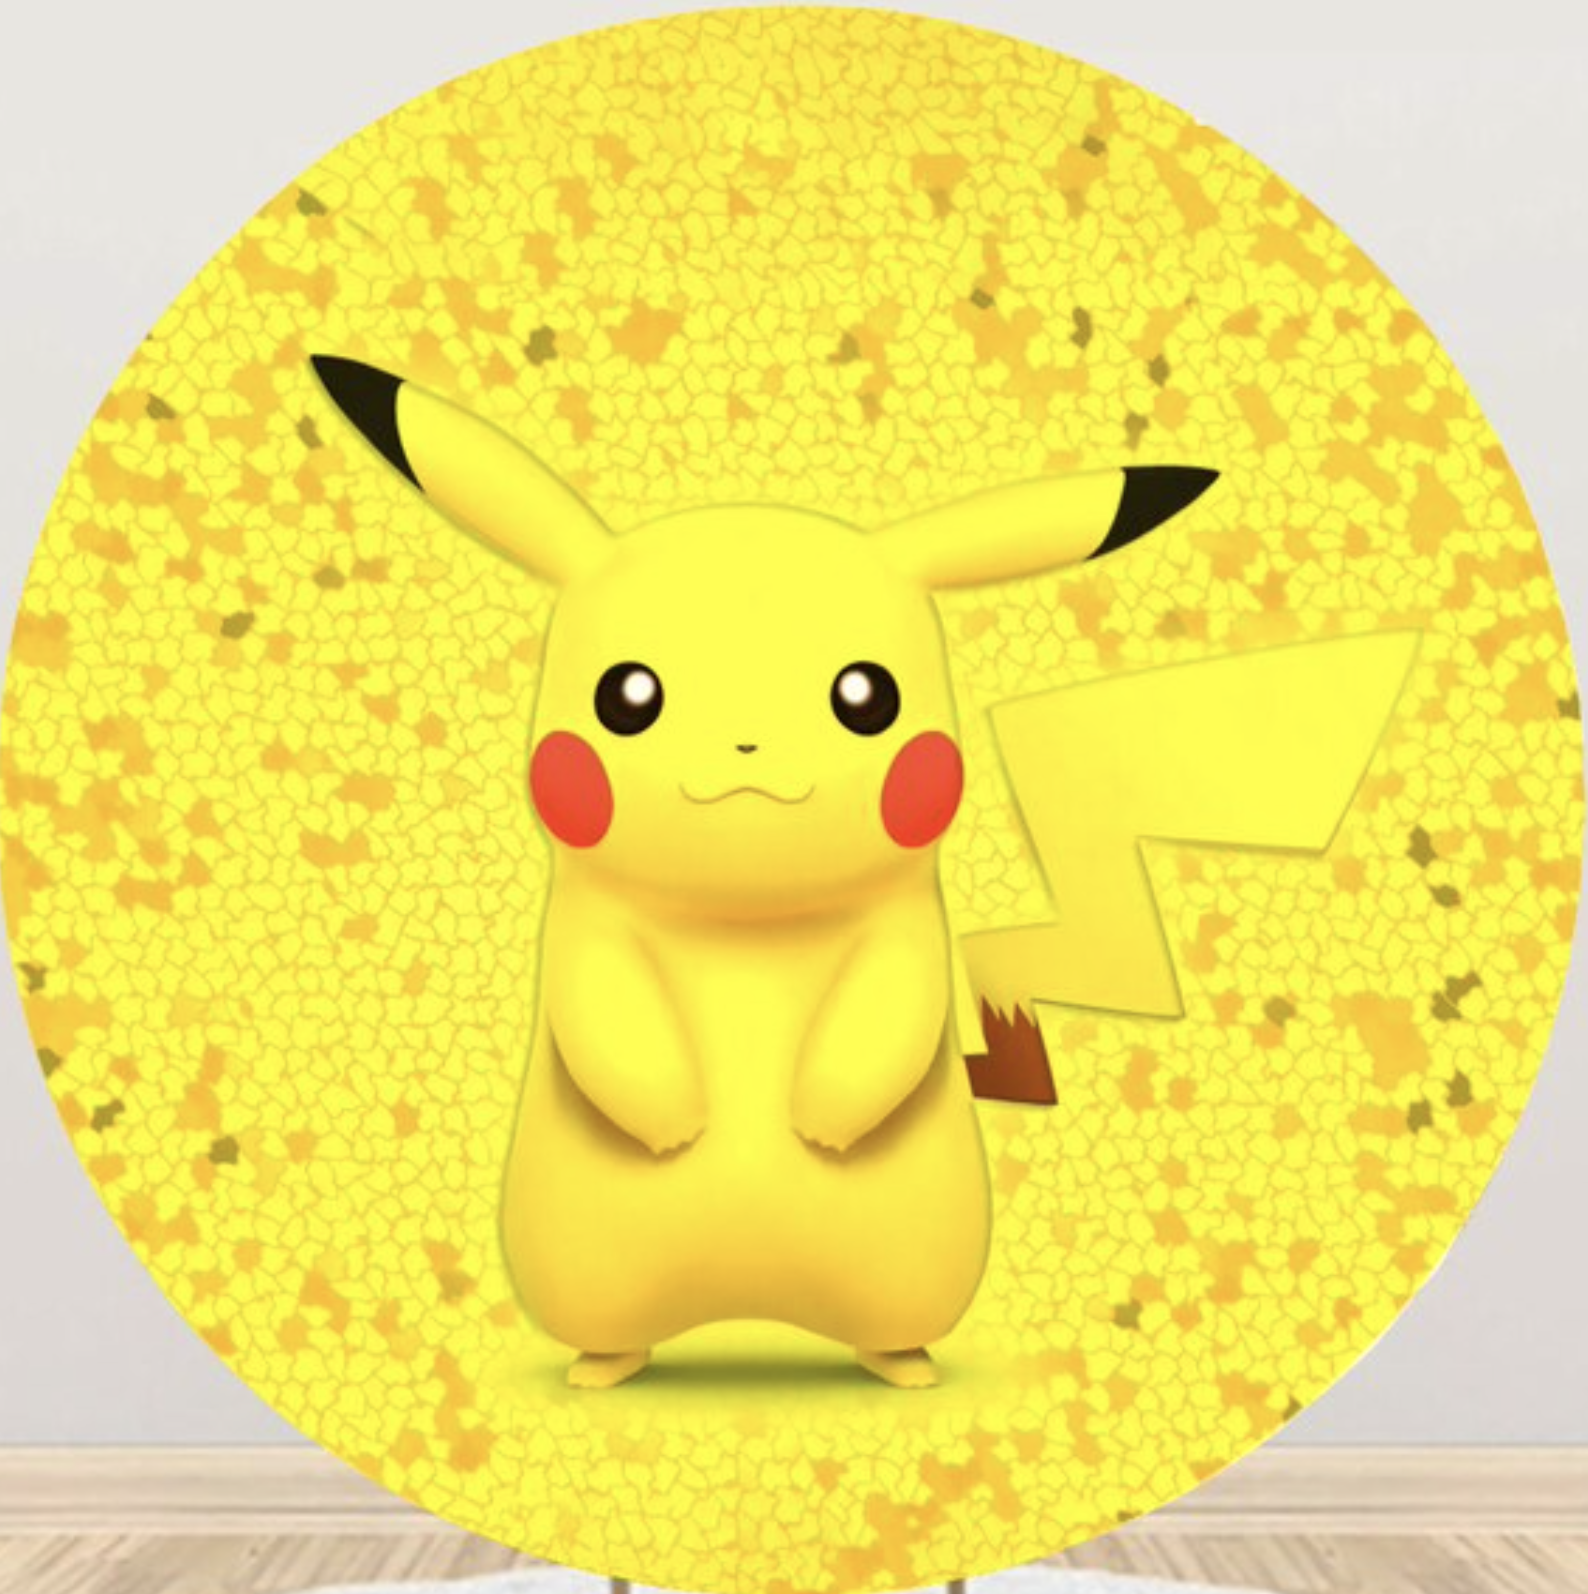 POKEMON ASH PIKACHU DECORATION PERSONALISED BIRTHDAY PARTY SUPPLIES BANNER  BACKD